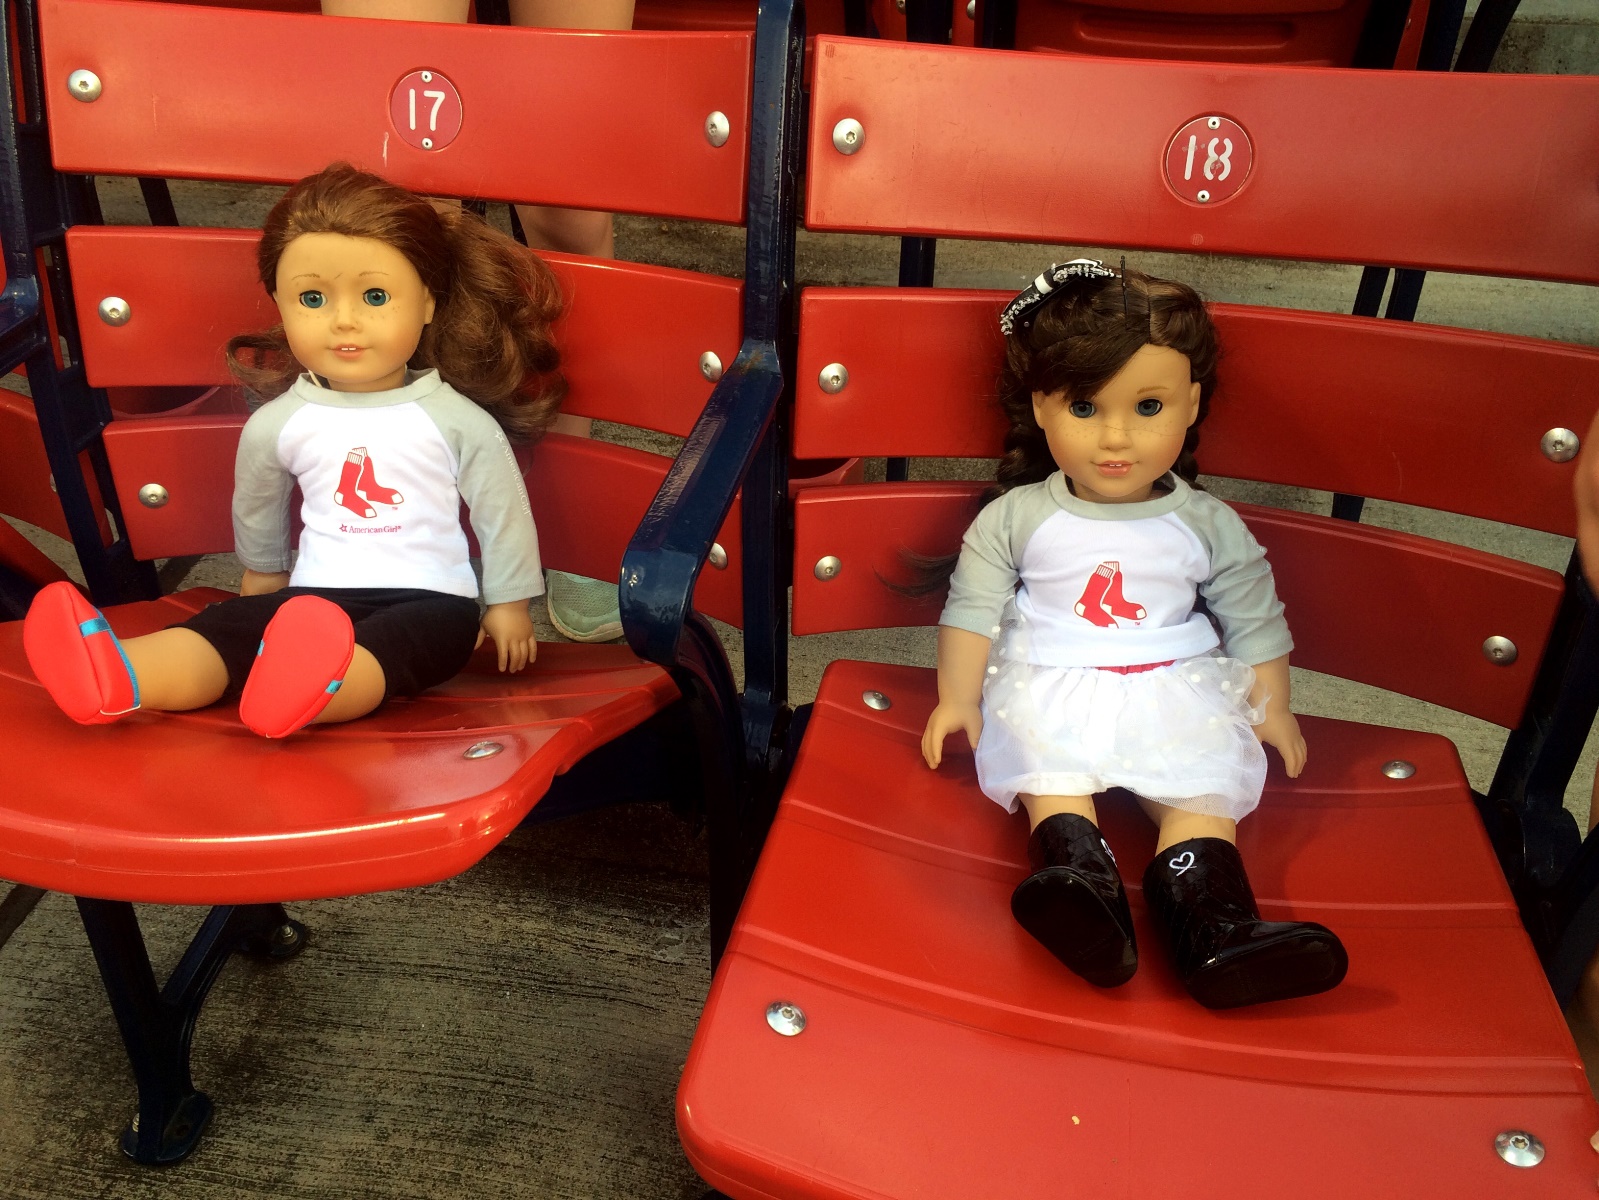 Evan and Lauren's Cool Blog: 7/27/16: American Girl Doll Night at